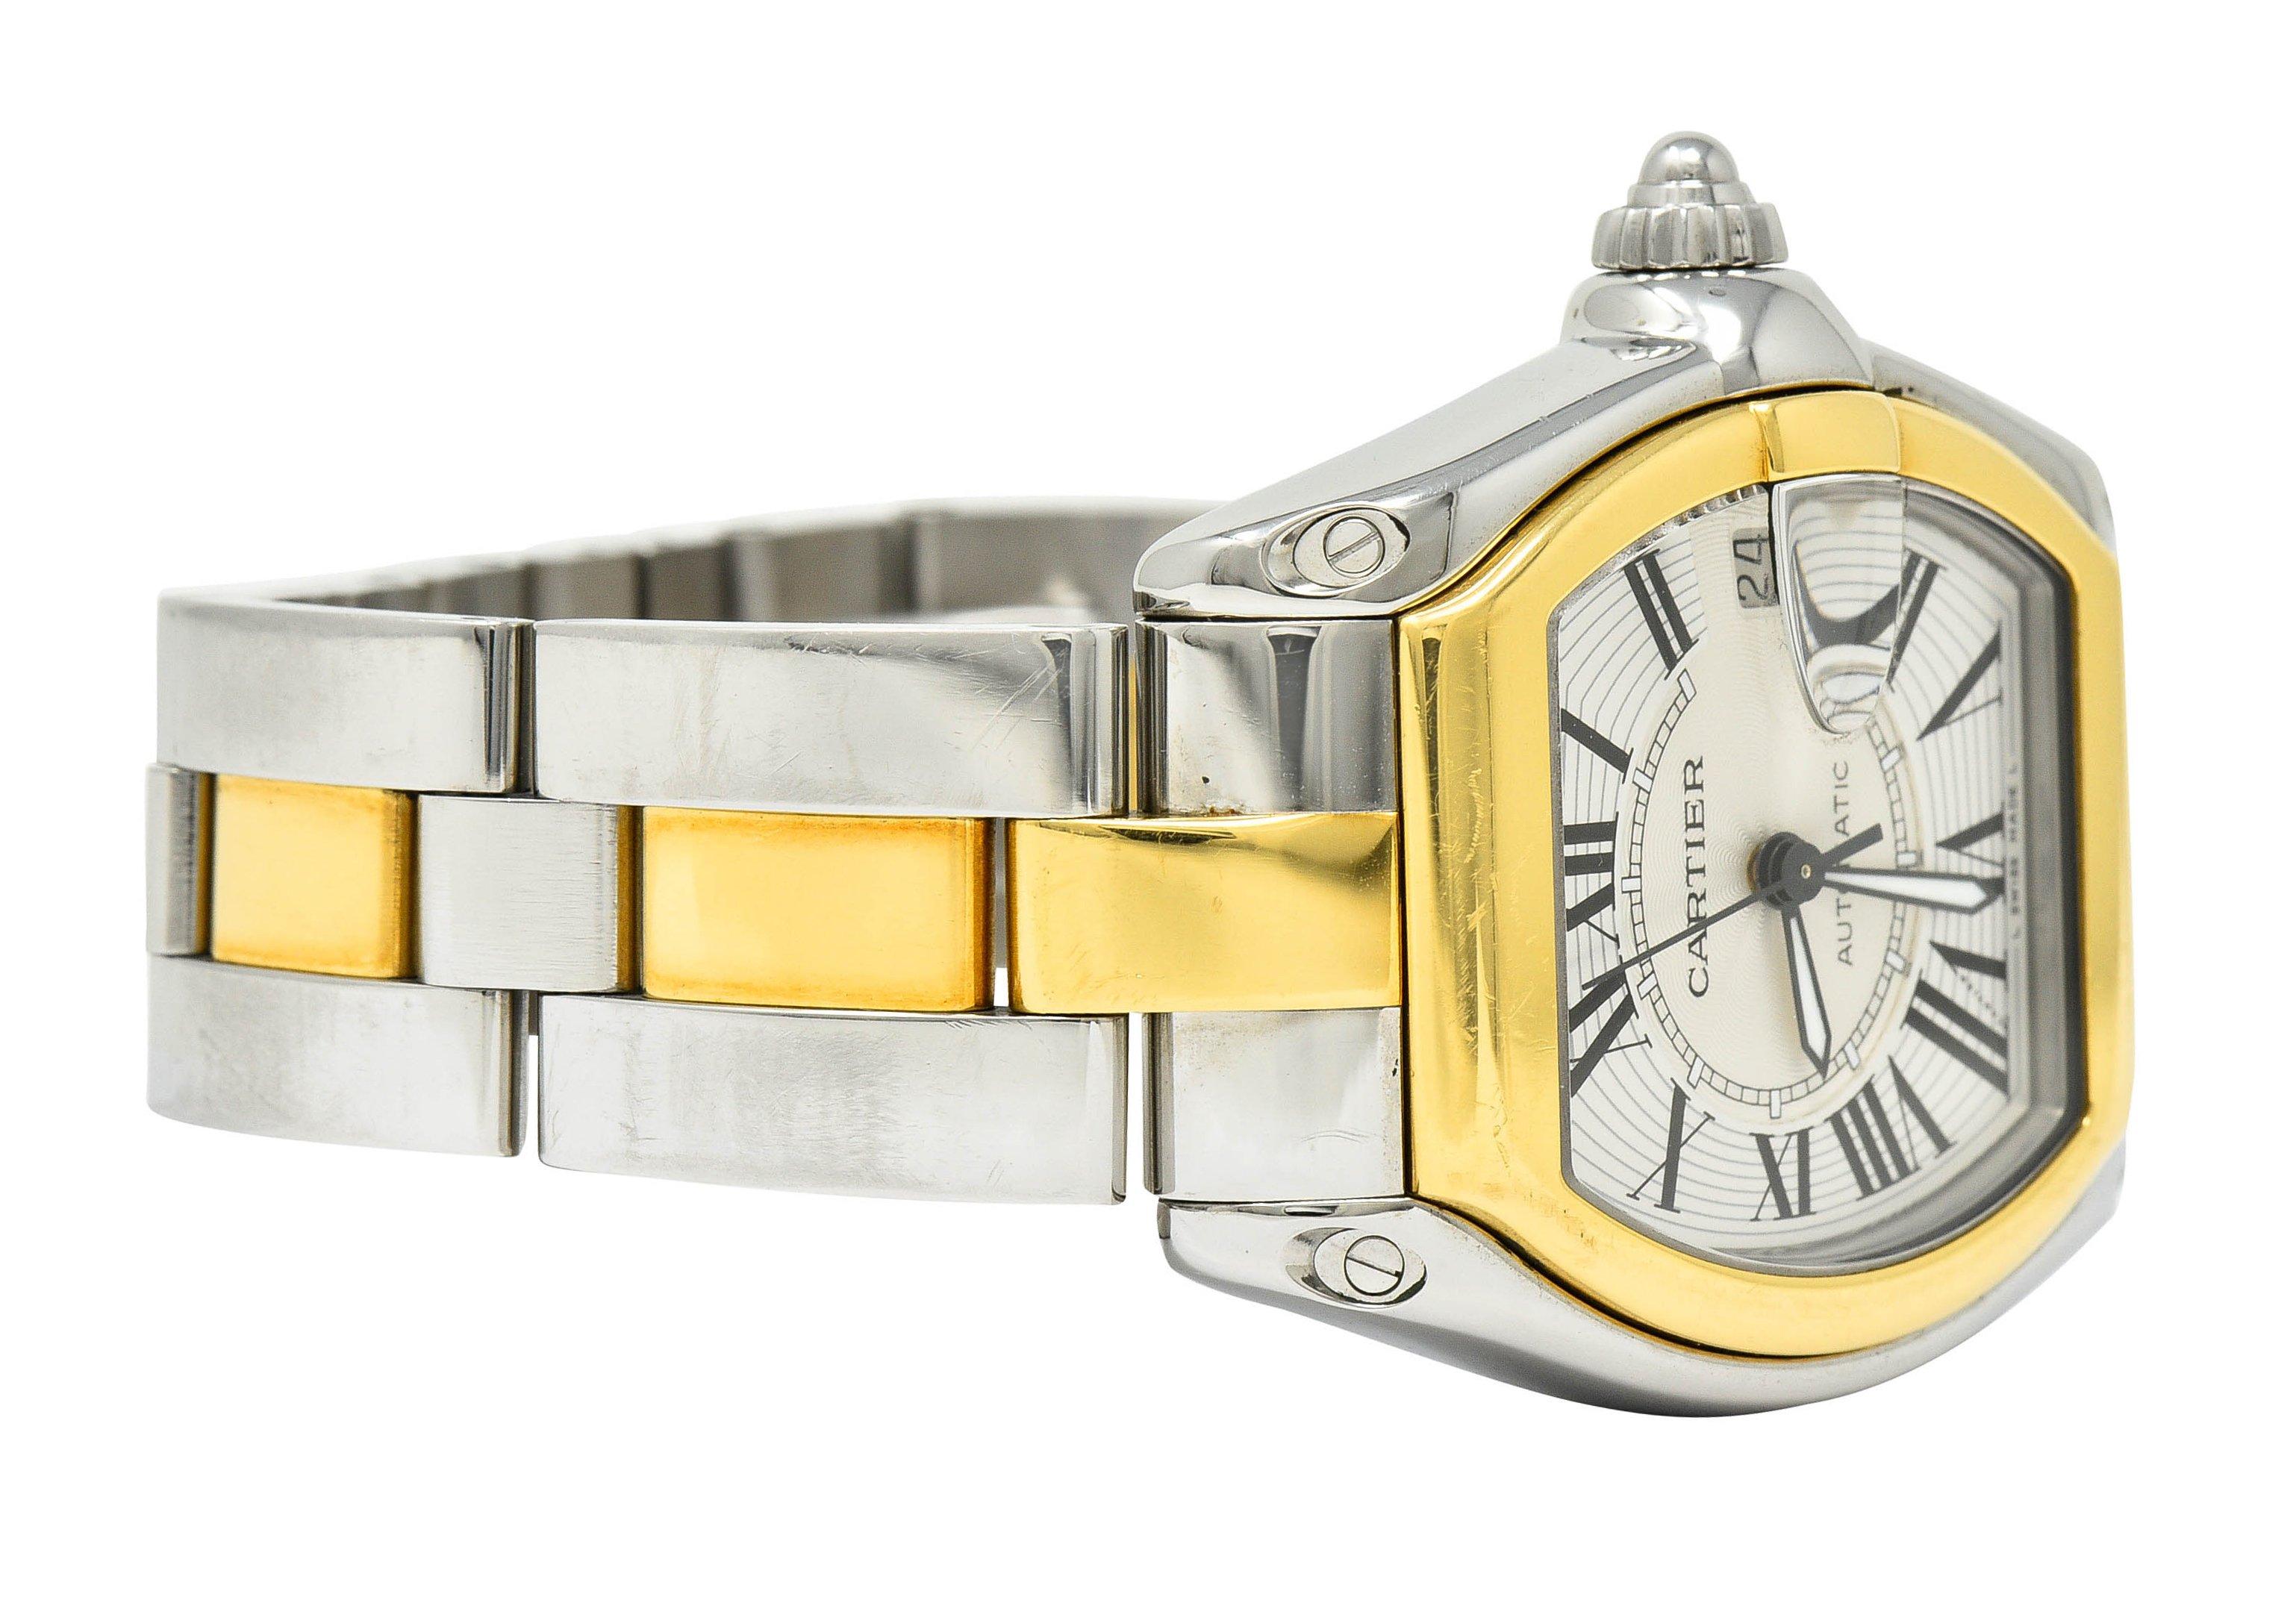 cartier roadster two tone